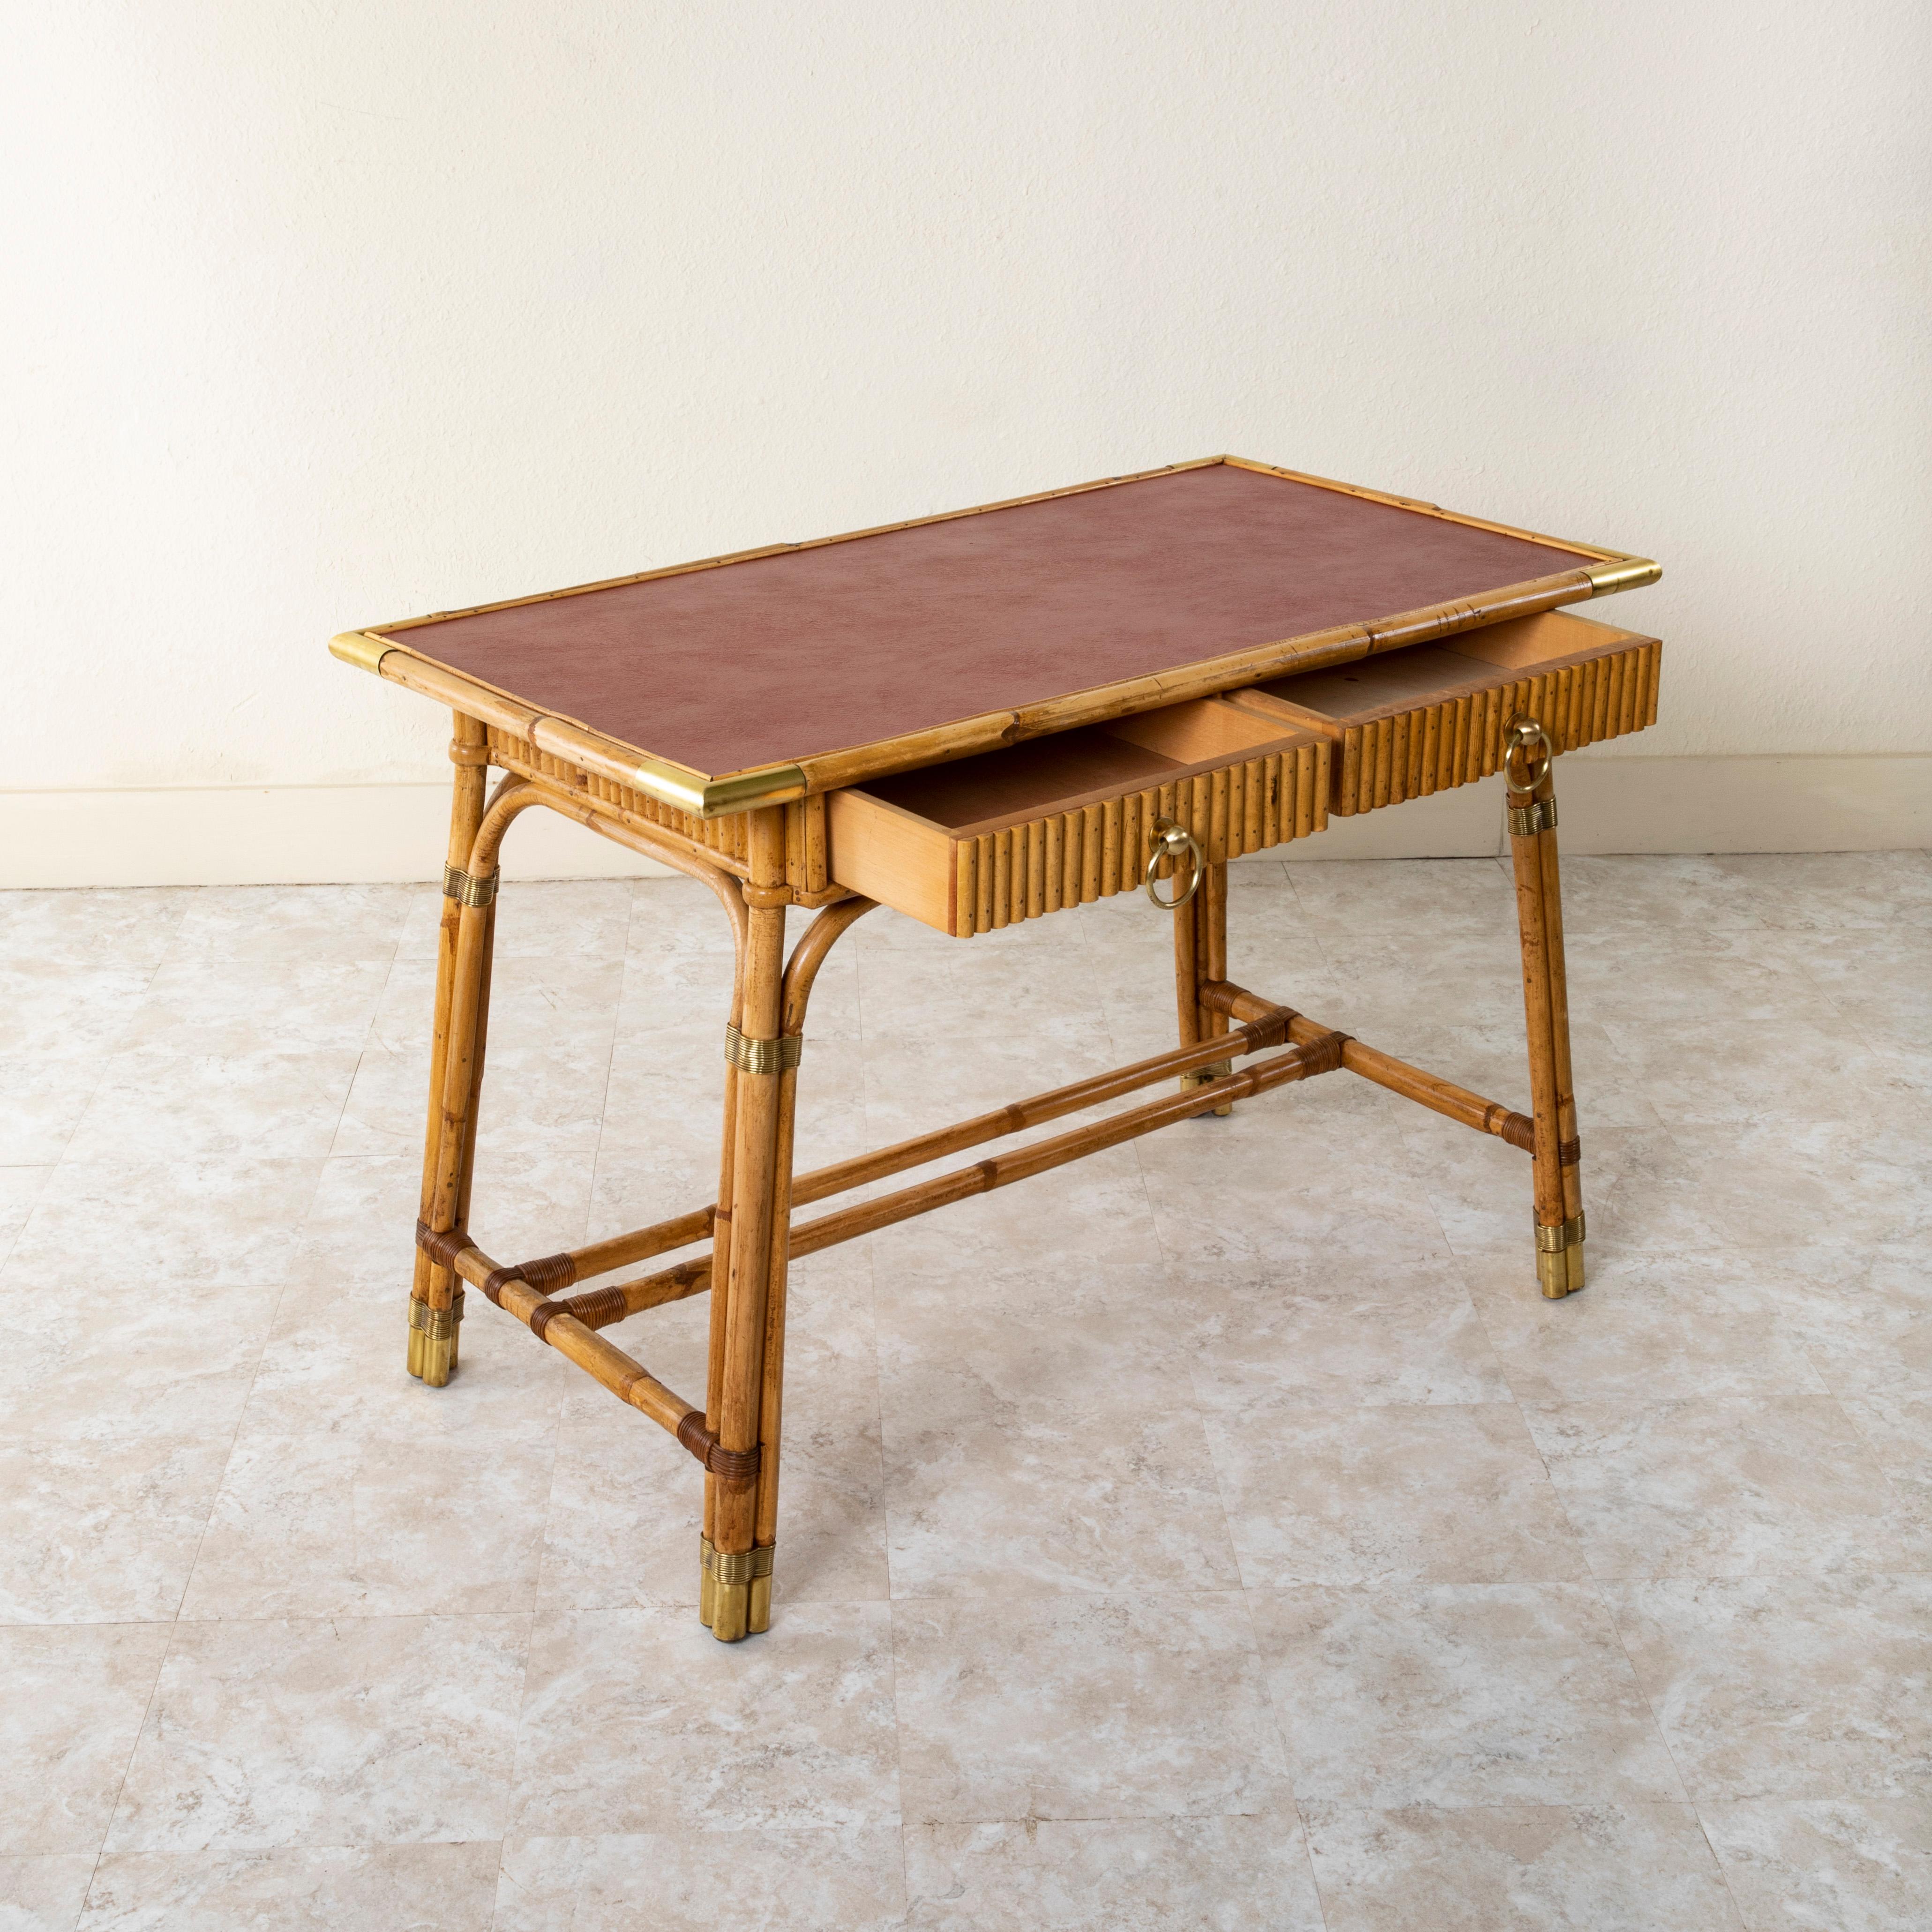 20th Century French Maison Jansen Bamboo Writing Desk and Chair, Louis Sognot For Sale 3